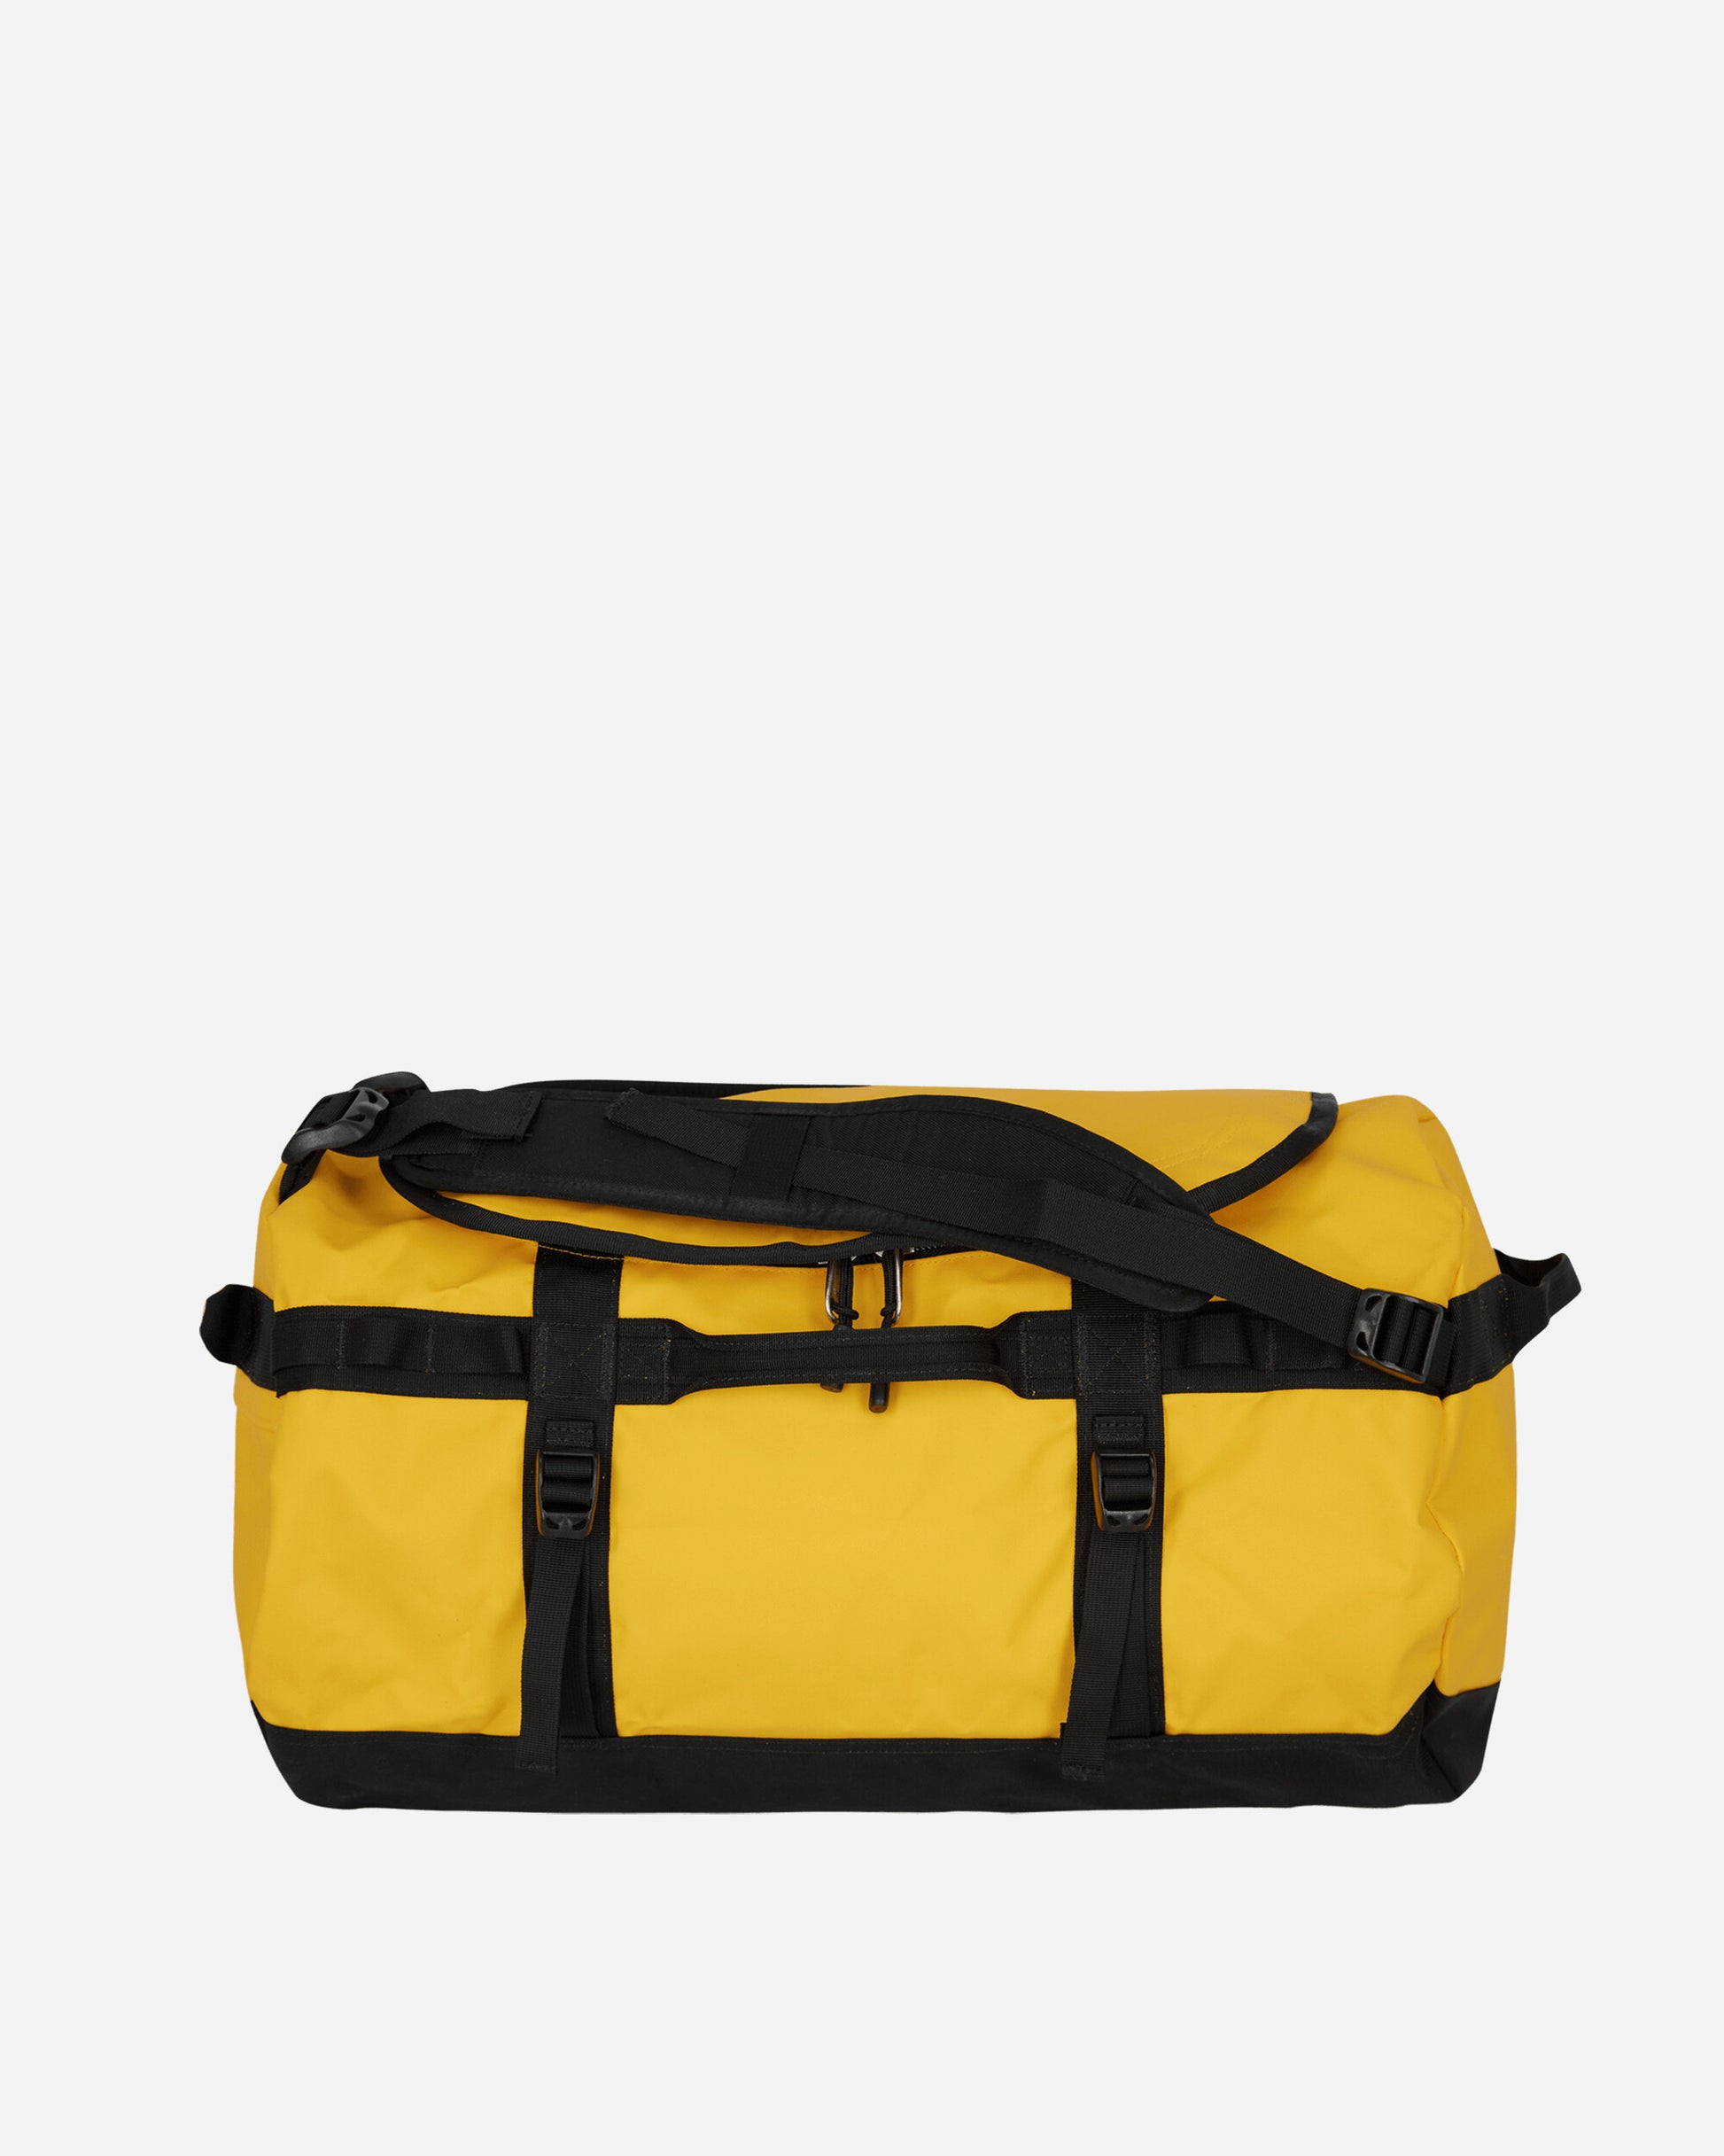 The North Face Base Camp Duffel - S Summit Gold/Tnf Black Bags and Backpacks Travel Bags NF0A52ST ZU31